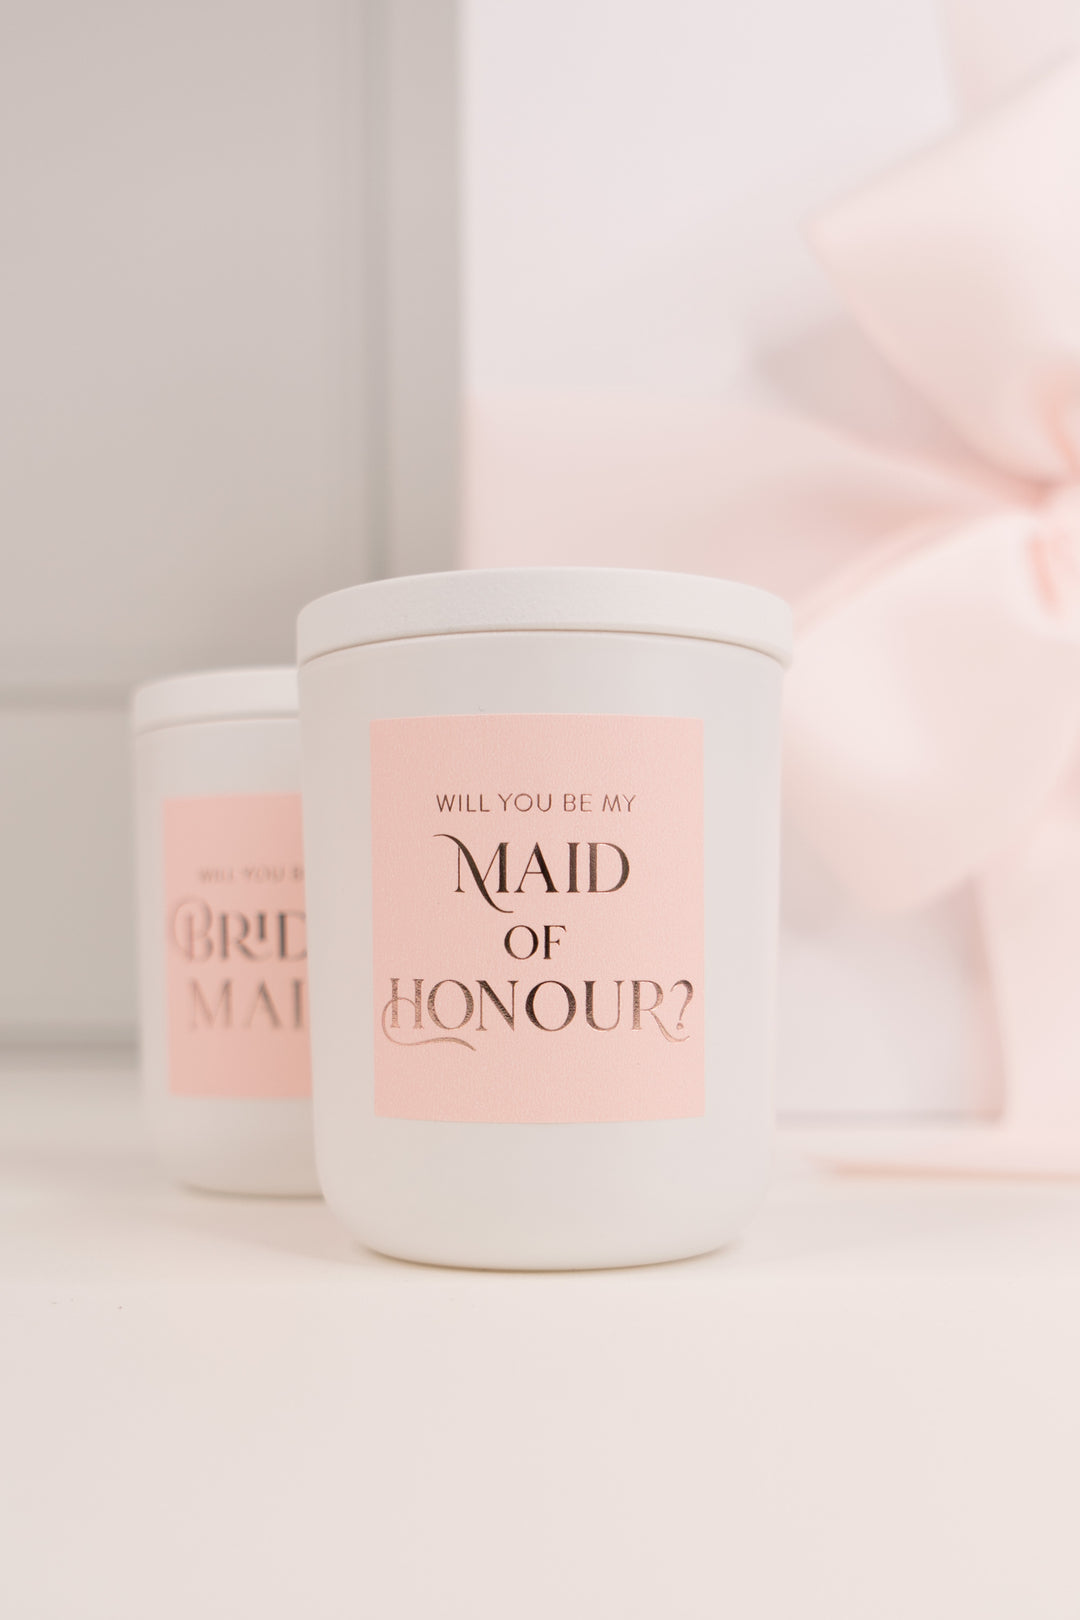 Proposal Candles